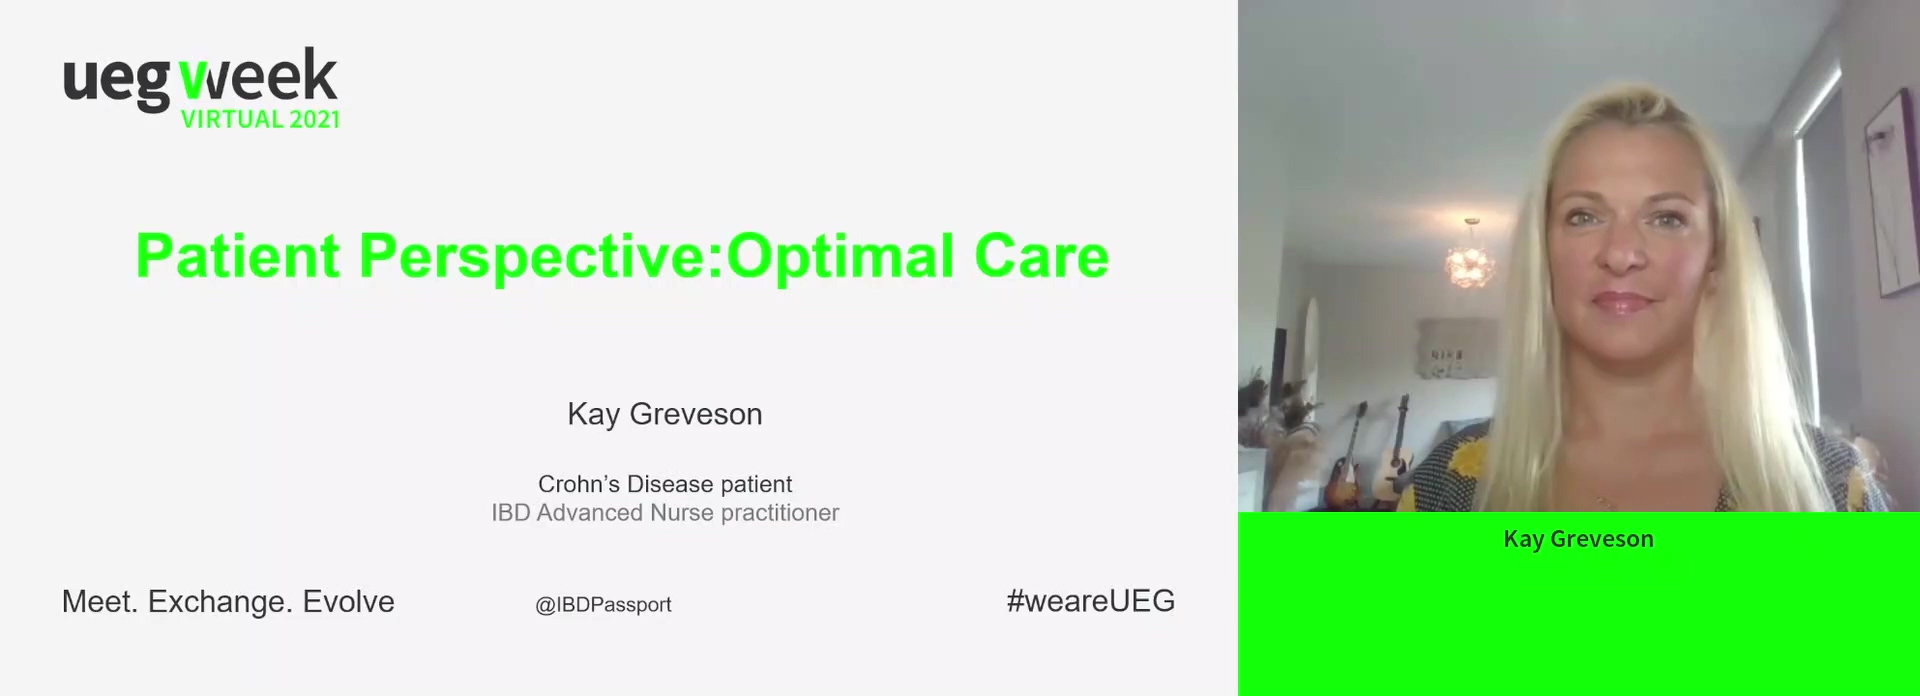 Patient perspective: Optimal care